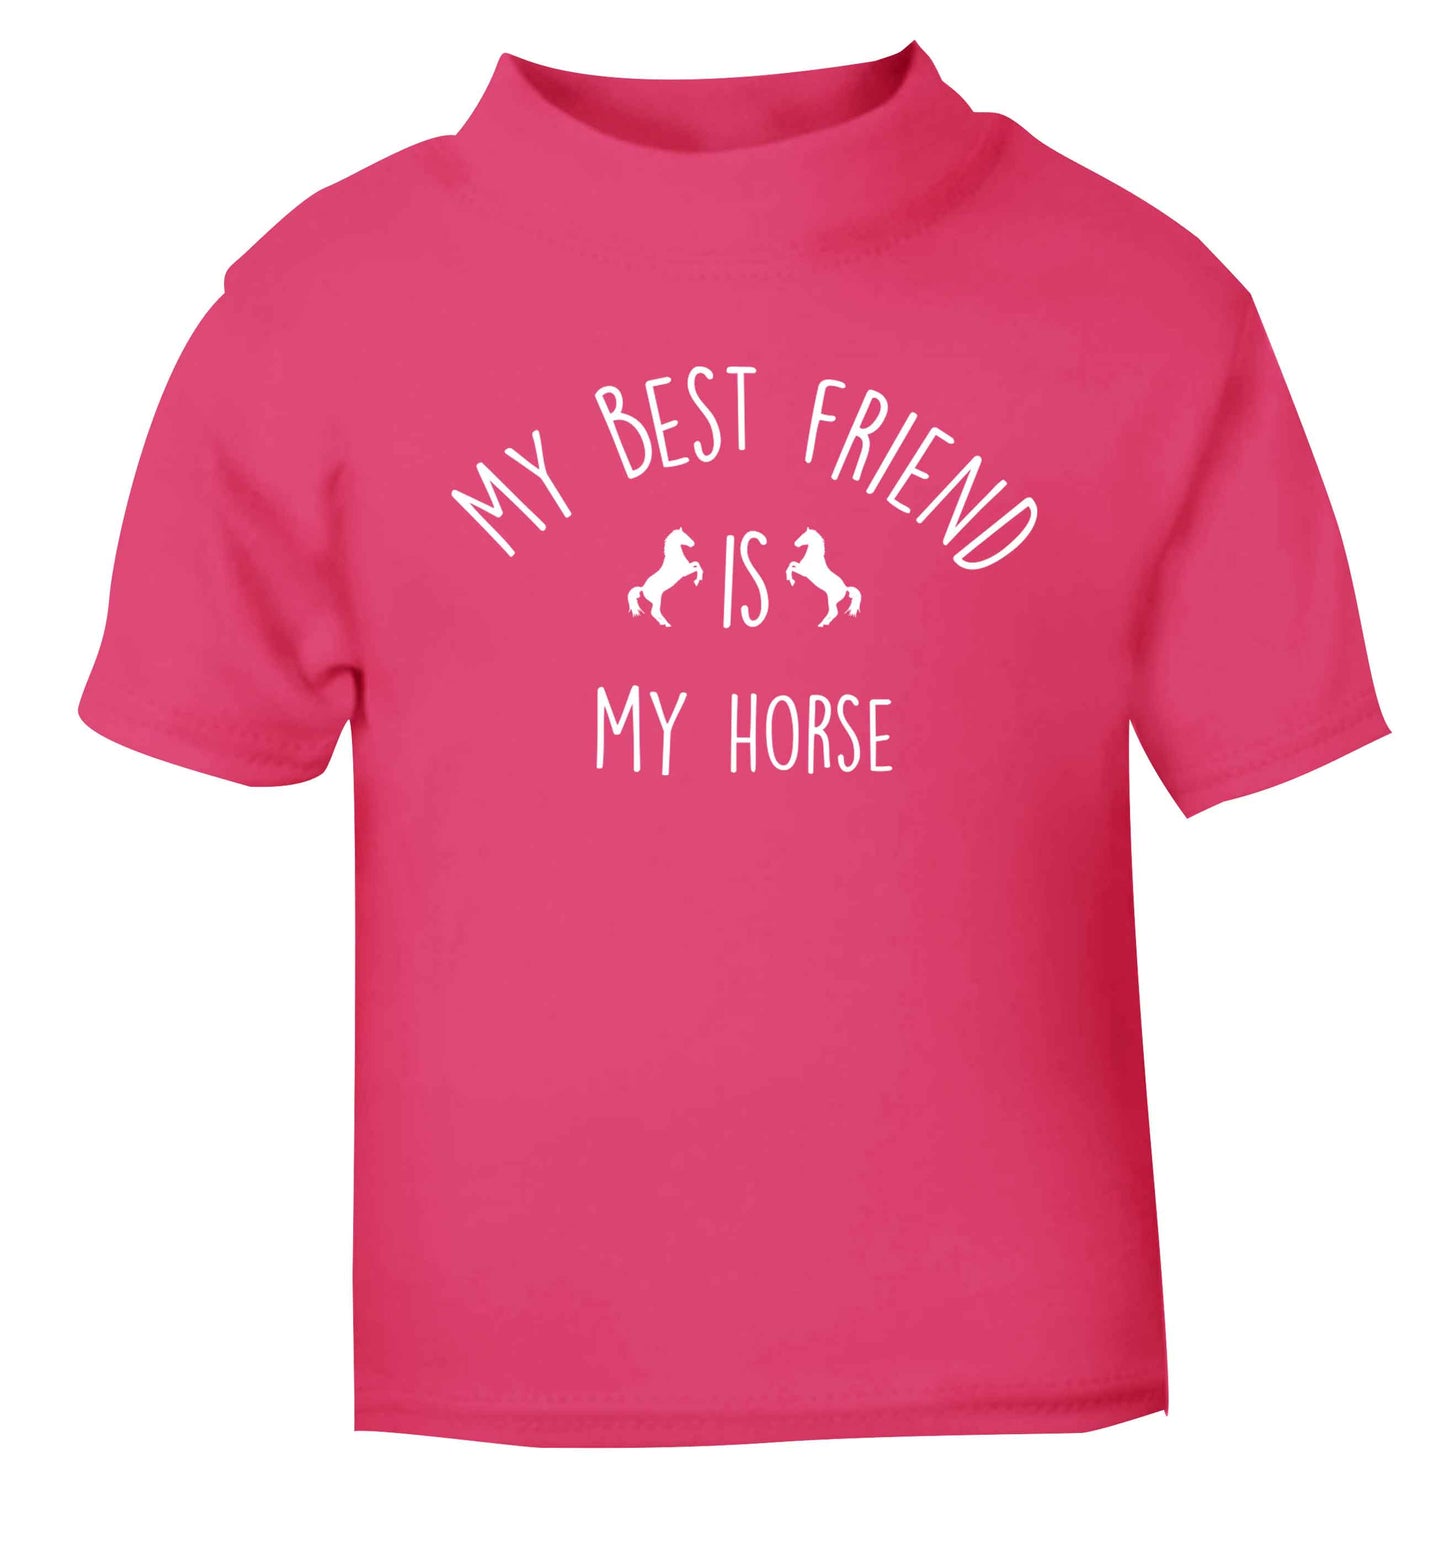 My best friend is my horse pink baby toddler Tshirt 2 Years